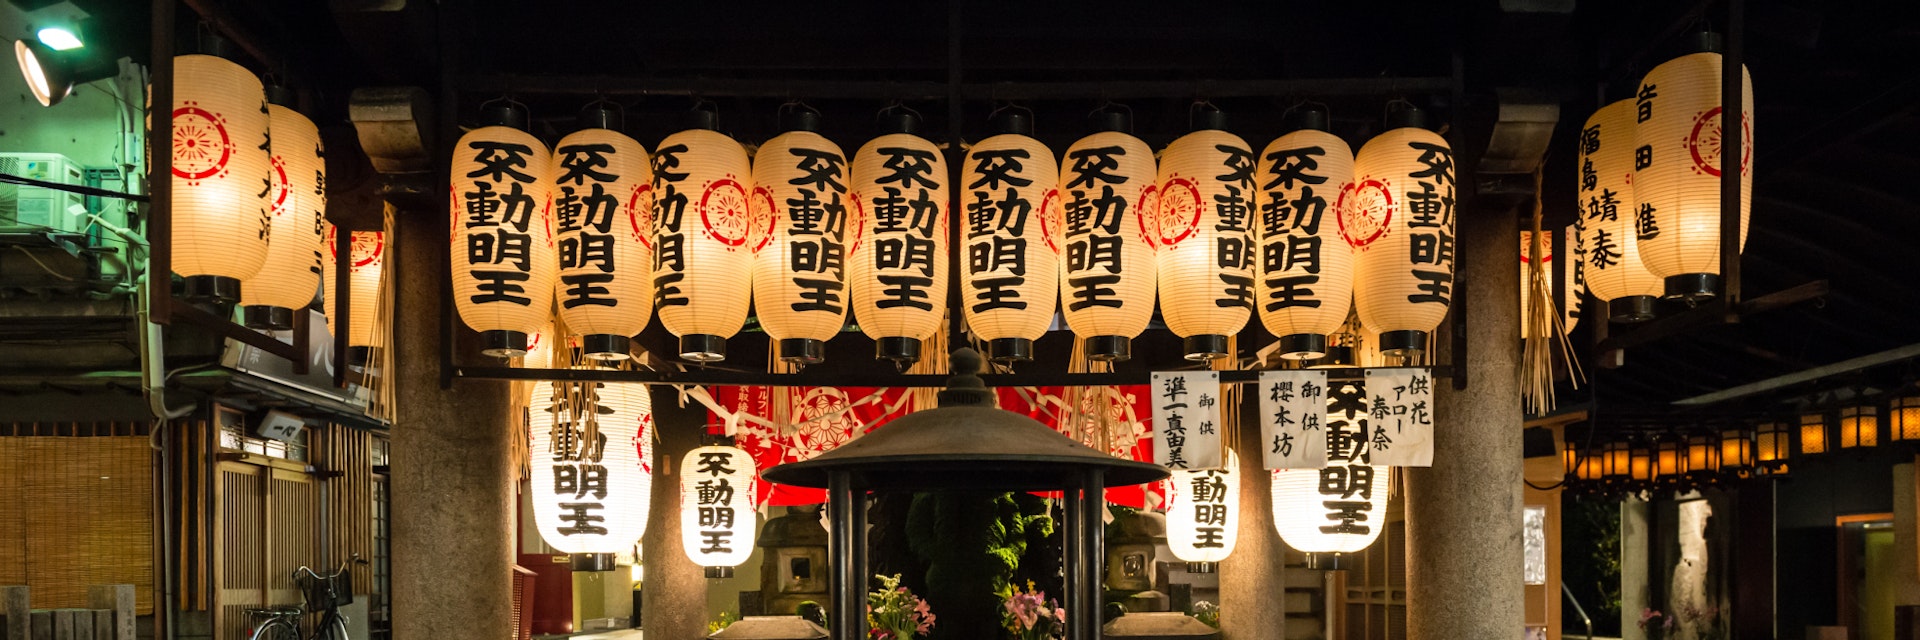 OSAKA, JAPAN - APRIL 6, 2015: Hozenji yokocho buddhist temple in Osaka. ; Shutterstock ID 270413630; Your name (First / Last): Laura Crawford; GL account no.: 65050; Netsuite department name: Online Editorial; Full Product or Project name including edition: Osaka city app POI images